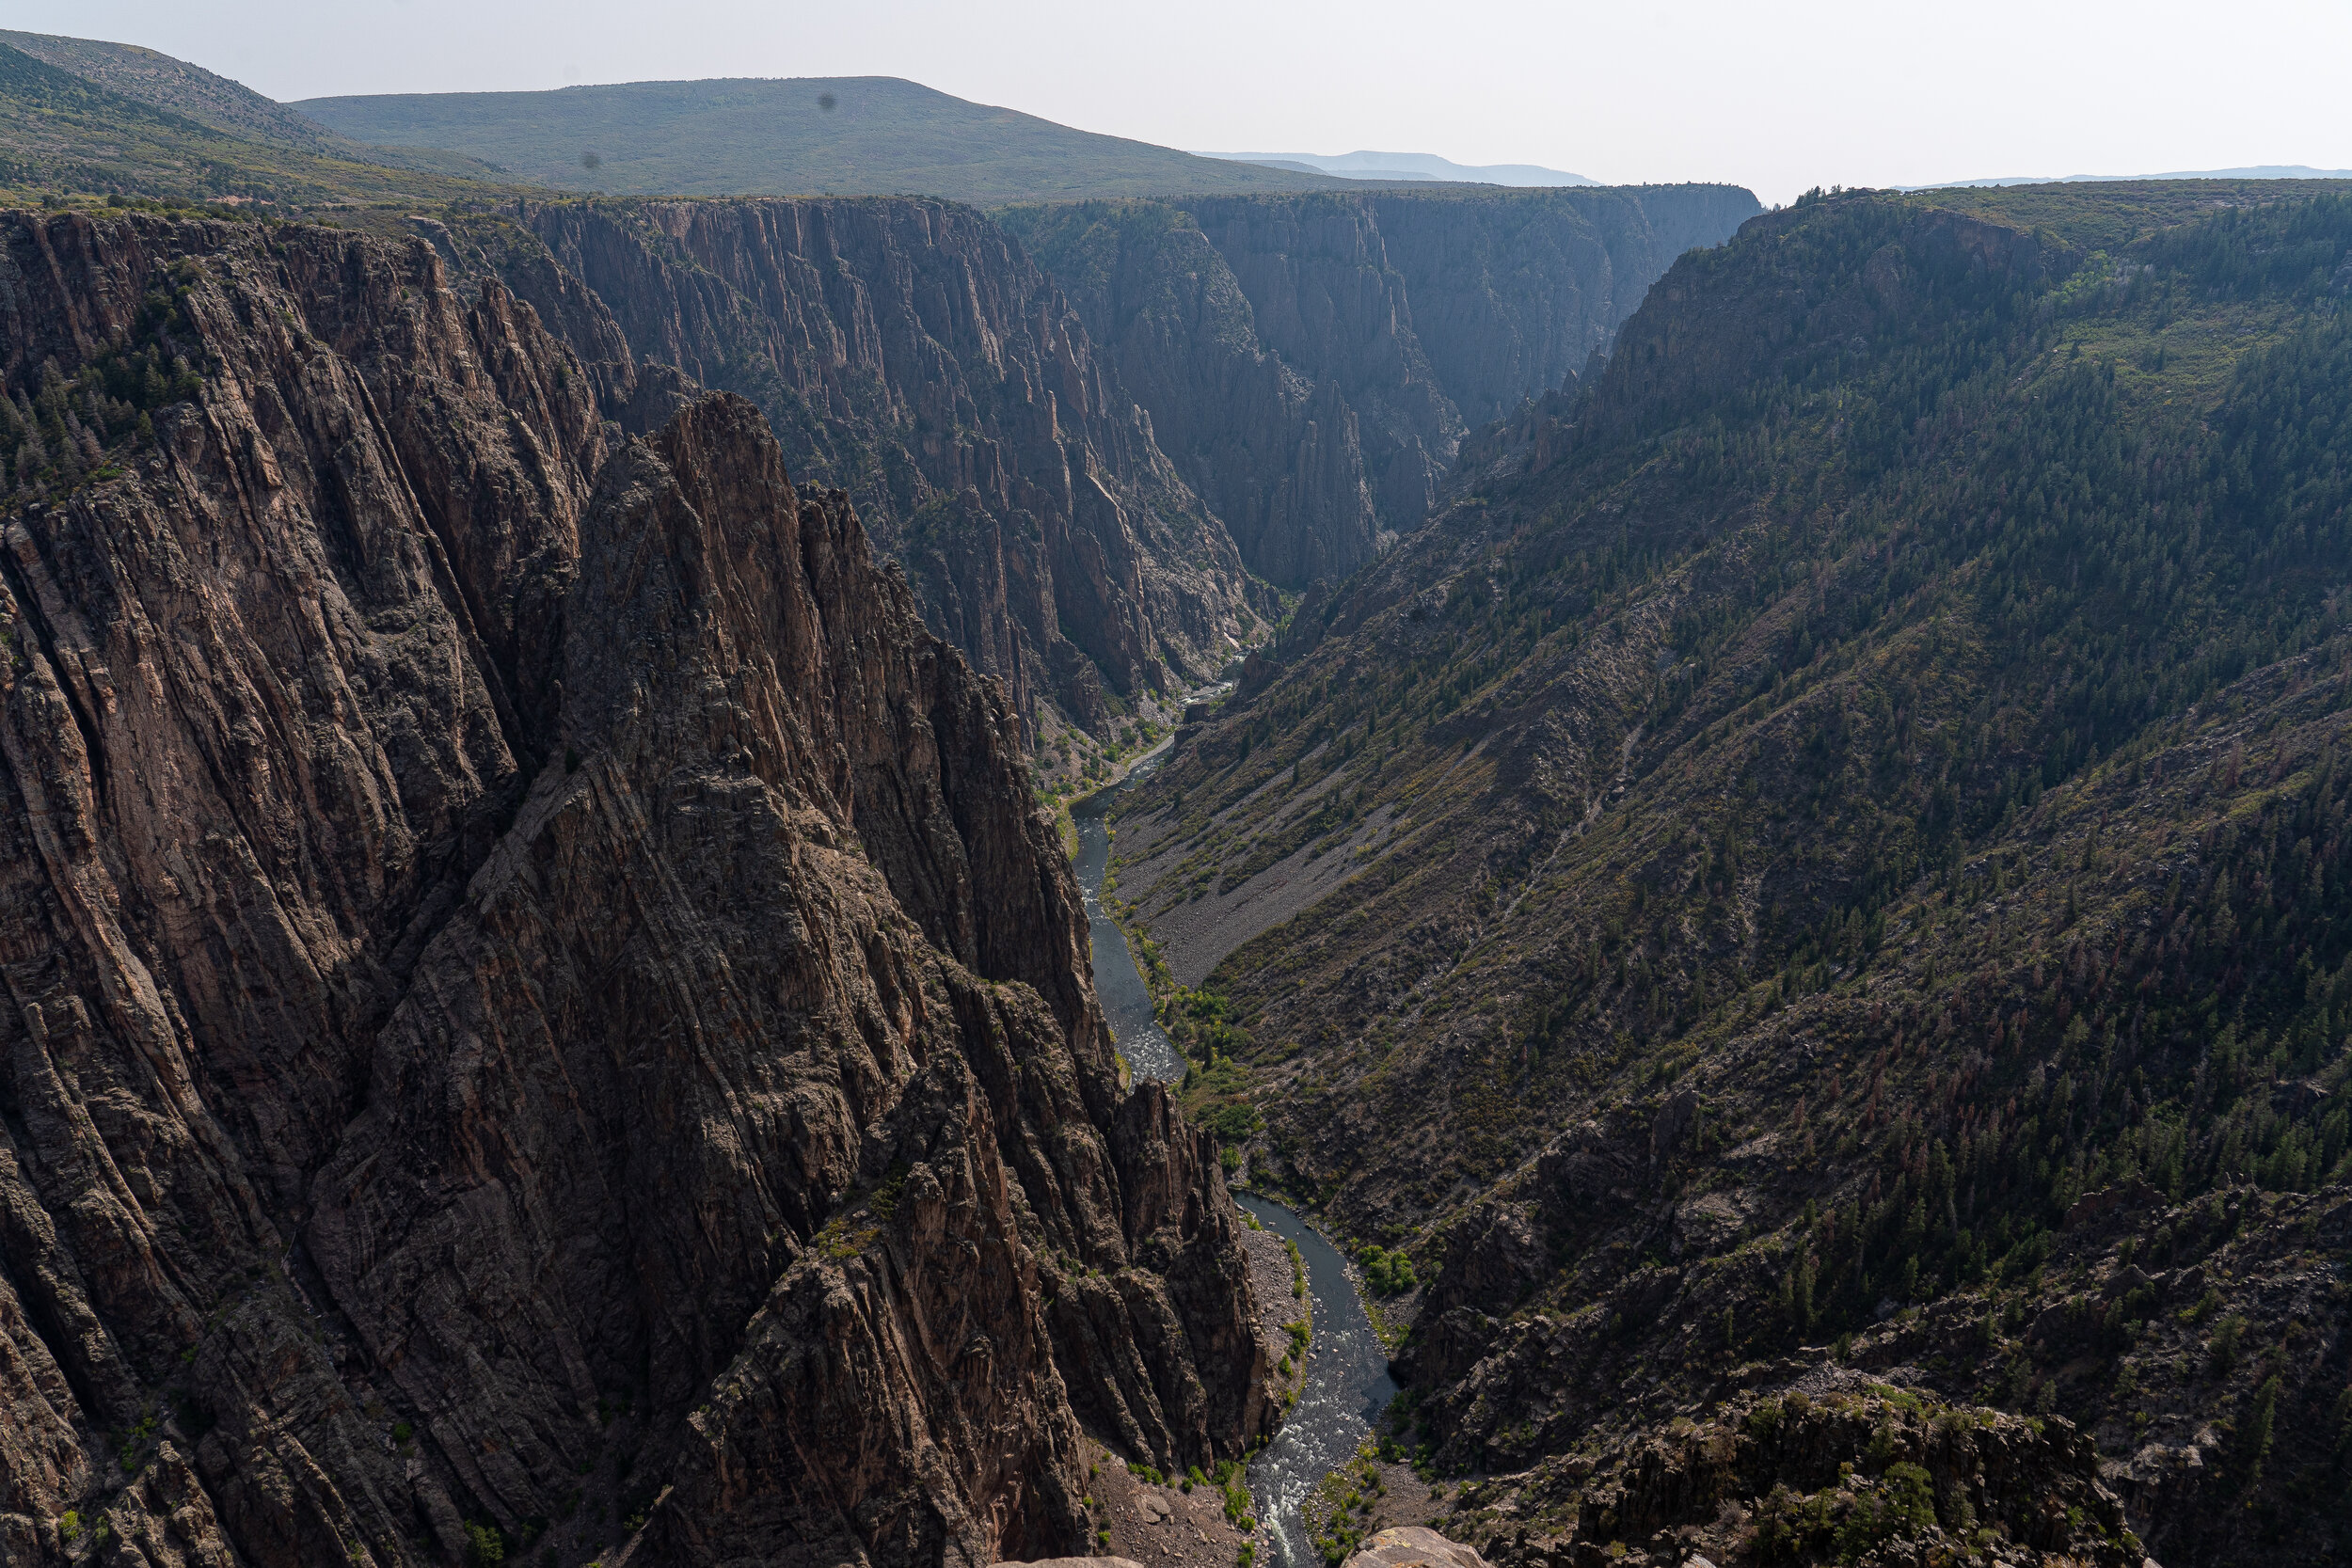  The Black Canyon is so named because its steepness makes it difficult for sunlight to penetrate into its depths. As a result, the canyon is often shadowed, causing the rocky walls to appear black. The right side of the canyon is more worn away than 